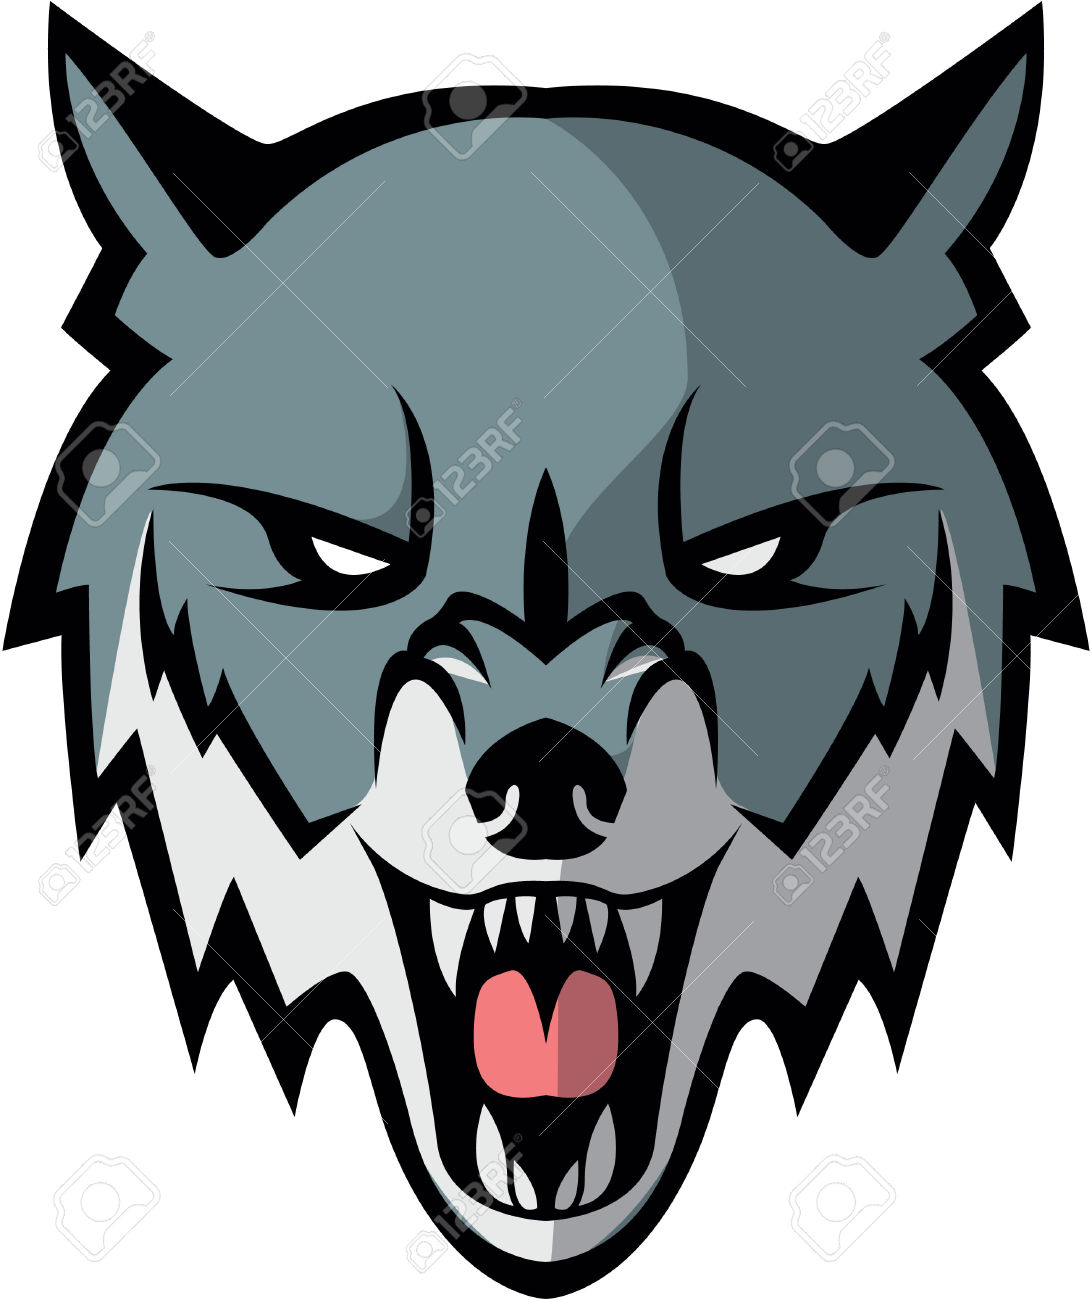 We are scared of Wolves Clipart